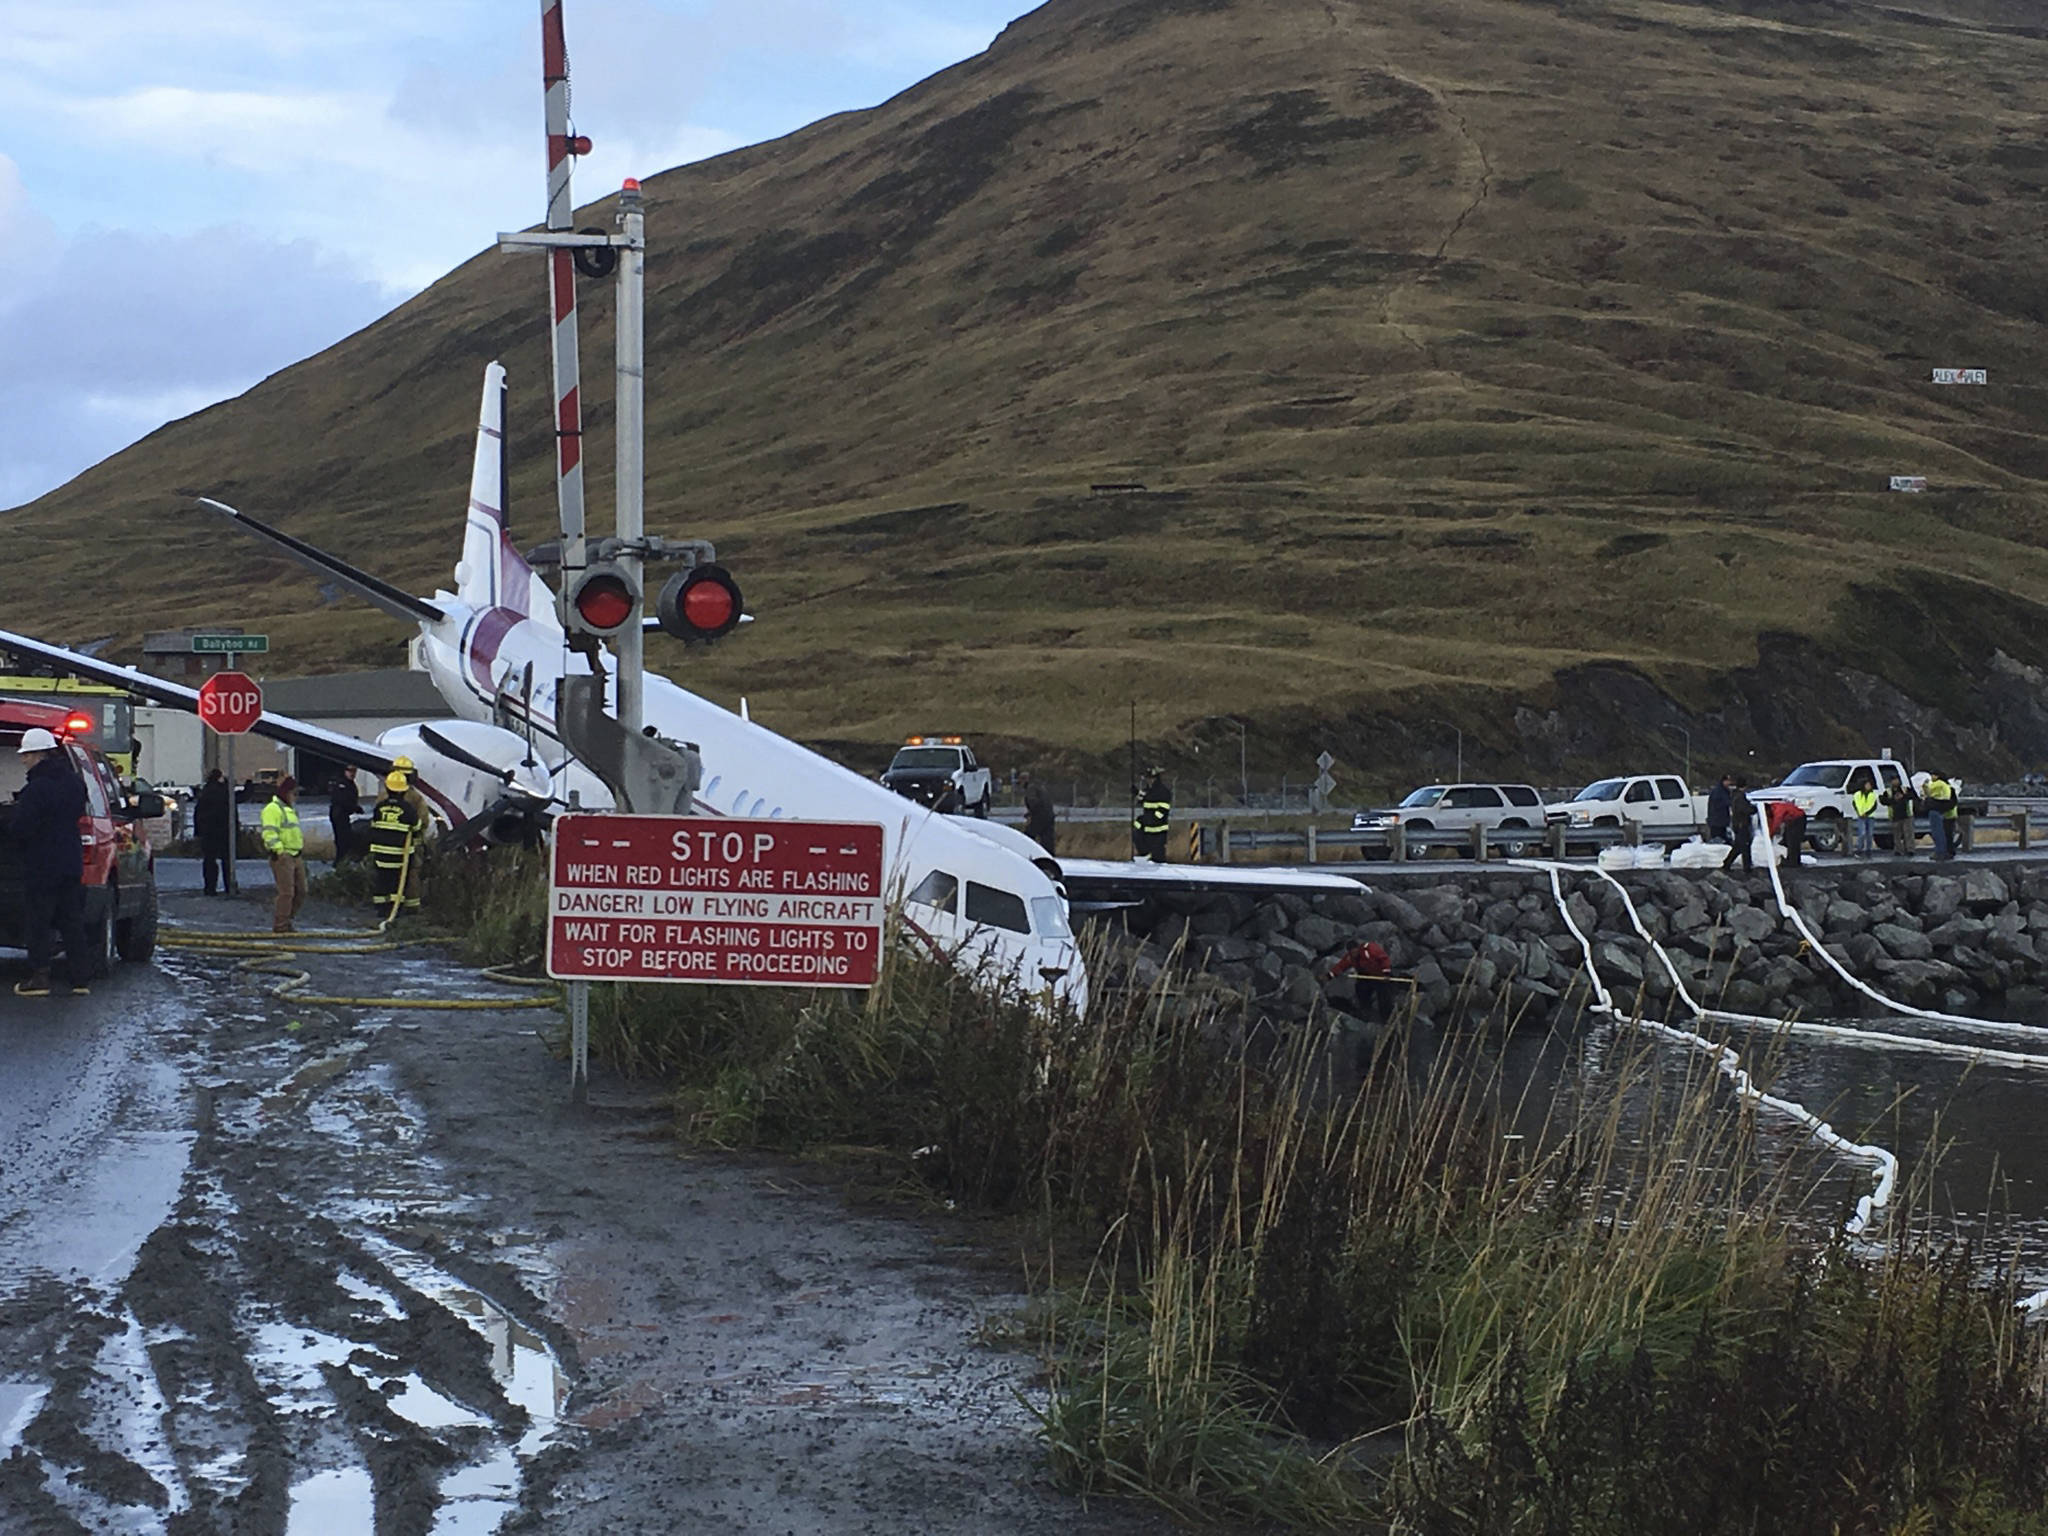 A commuter airplane has crashed near the airport in a small Alaska community on the Bering Sea, Thursday, Oct. 17, 2019, in Unalaska, Alaska. Freelance photographer Jim Paulin says the crash at the Unalaska airport occurred Thursday after 5 p.m. Paulin says the Peninsula Airways flight from Anchorage to Dutch Harbor landed about 500 feet (152 meters) beyond the airport near the water. (Jim Paulin via AP)